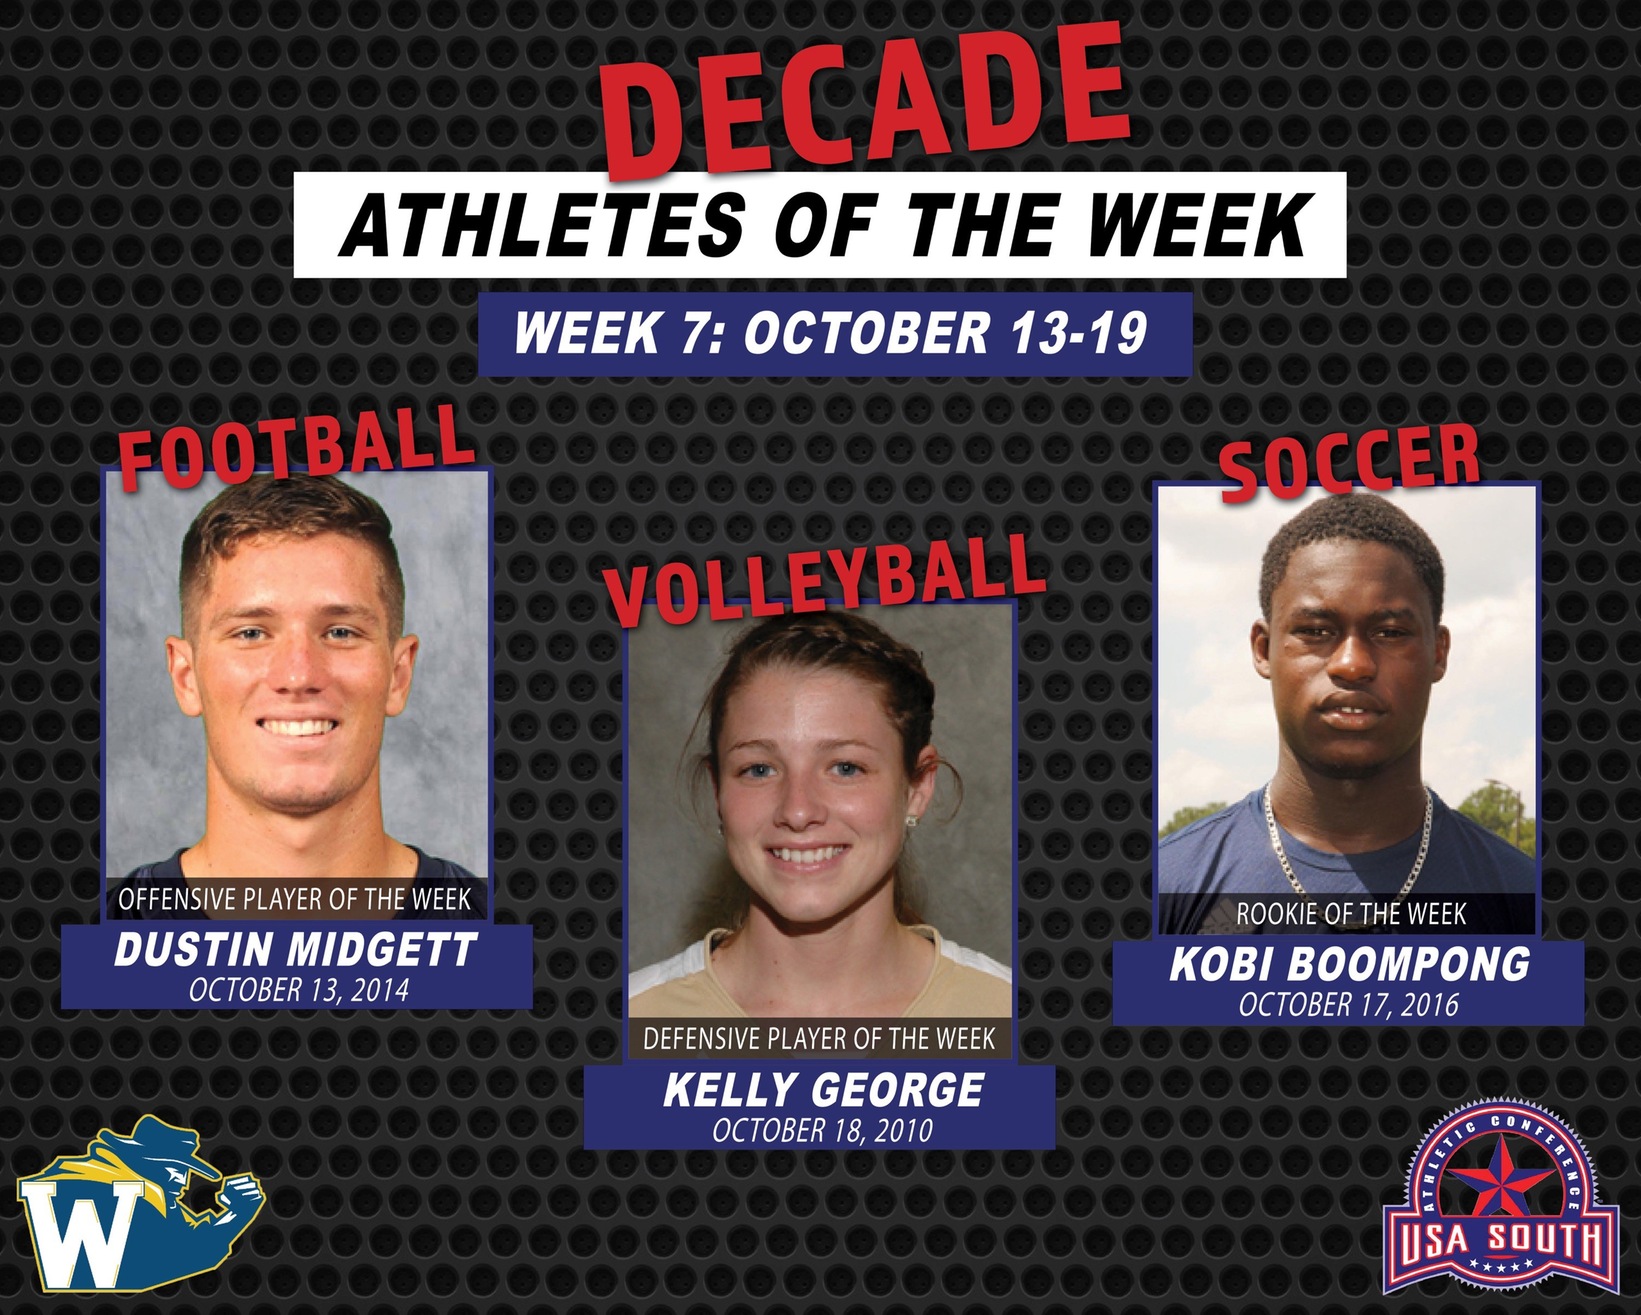 Volleyball's Kelly George Takes Home Decade Athlete of the Week